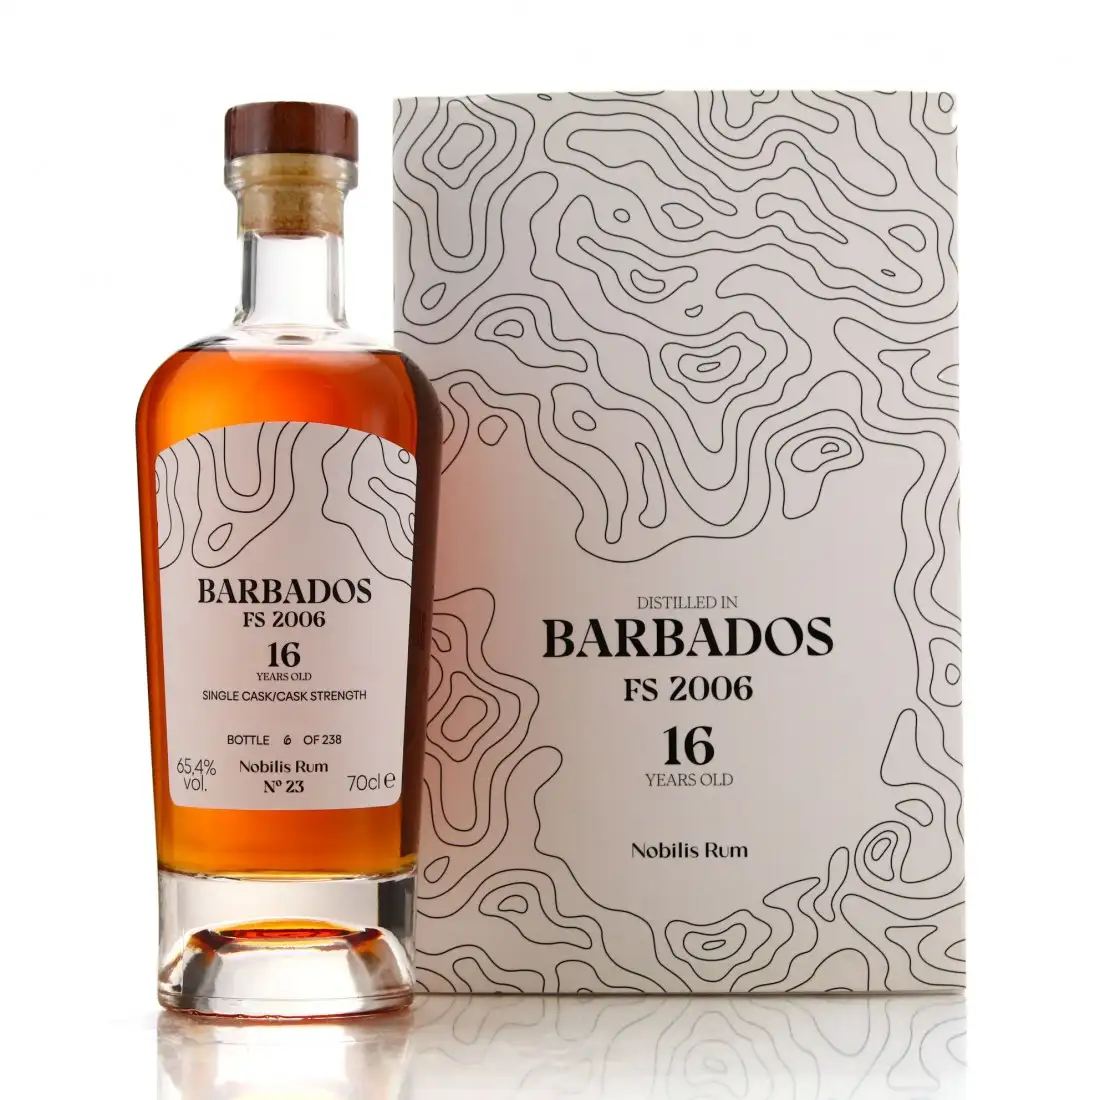 Image of the front of the bottle of the rum No. 23 Barbados FS